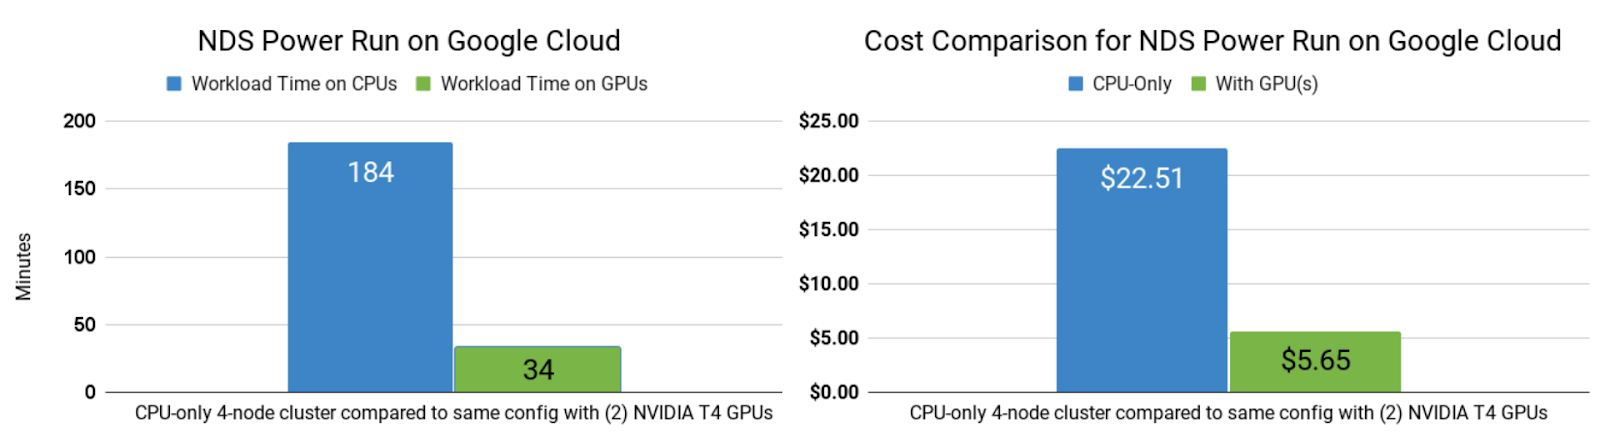 The left bar chart shows that an NDS Power run runtime on a CPU-only four-node cluster takes 184 mins compared to the same four-node cluster with 8xT4 NVIDIA GPUs, which takes 34 mins. The right bar chart shows that the Google Cloud Dataproc cost for an NDS Power run on CPU nodes is $22.51 and $5.65 with NVIDIA T4 GPUs.